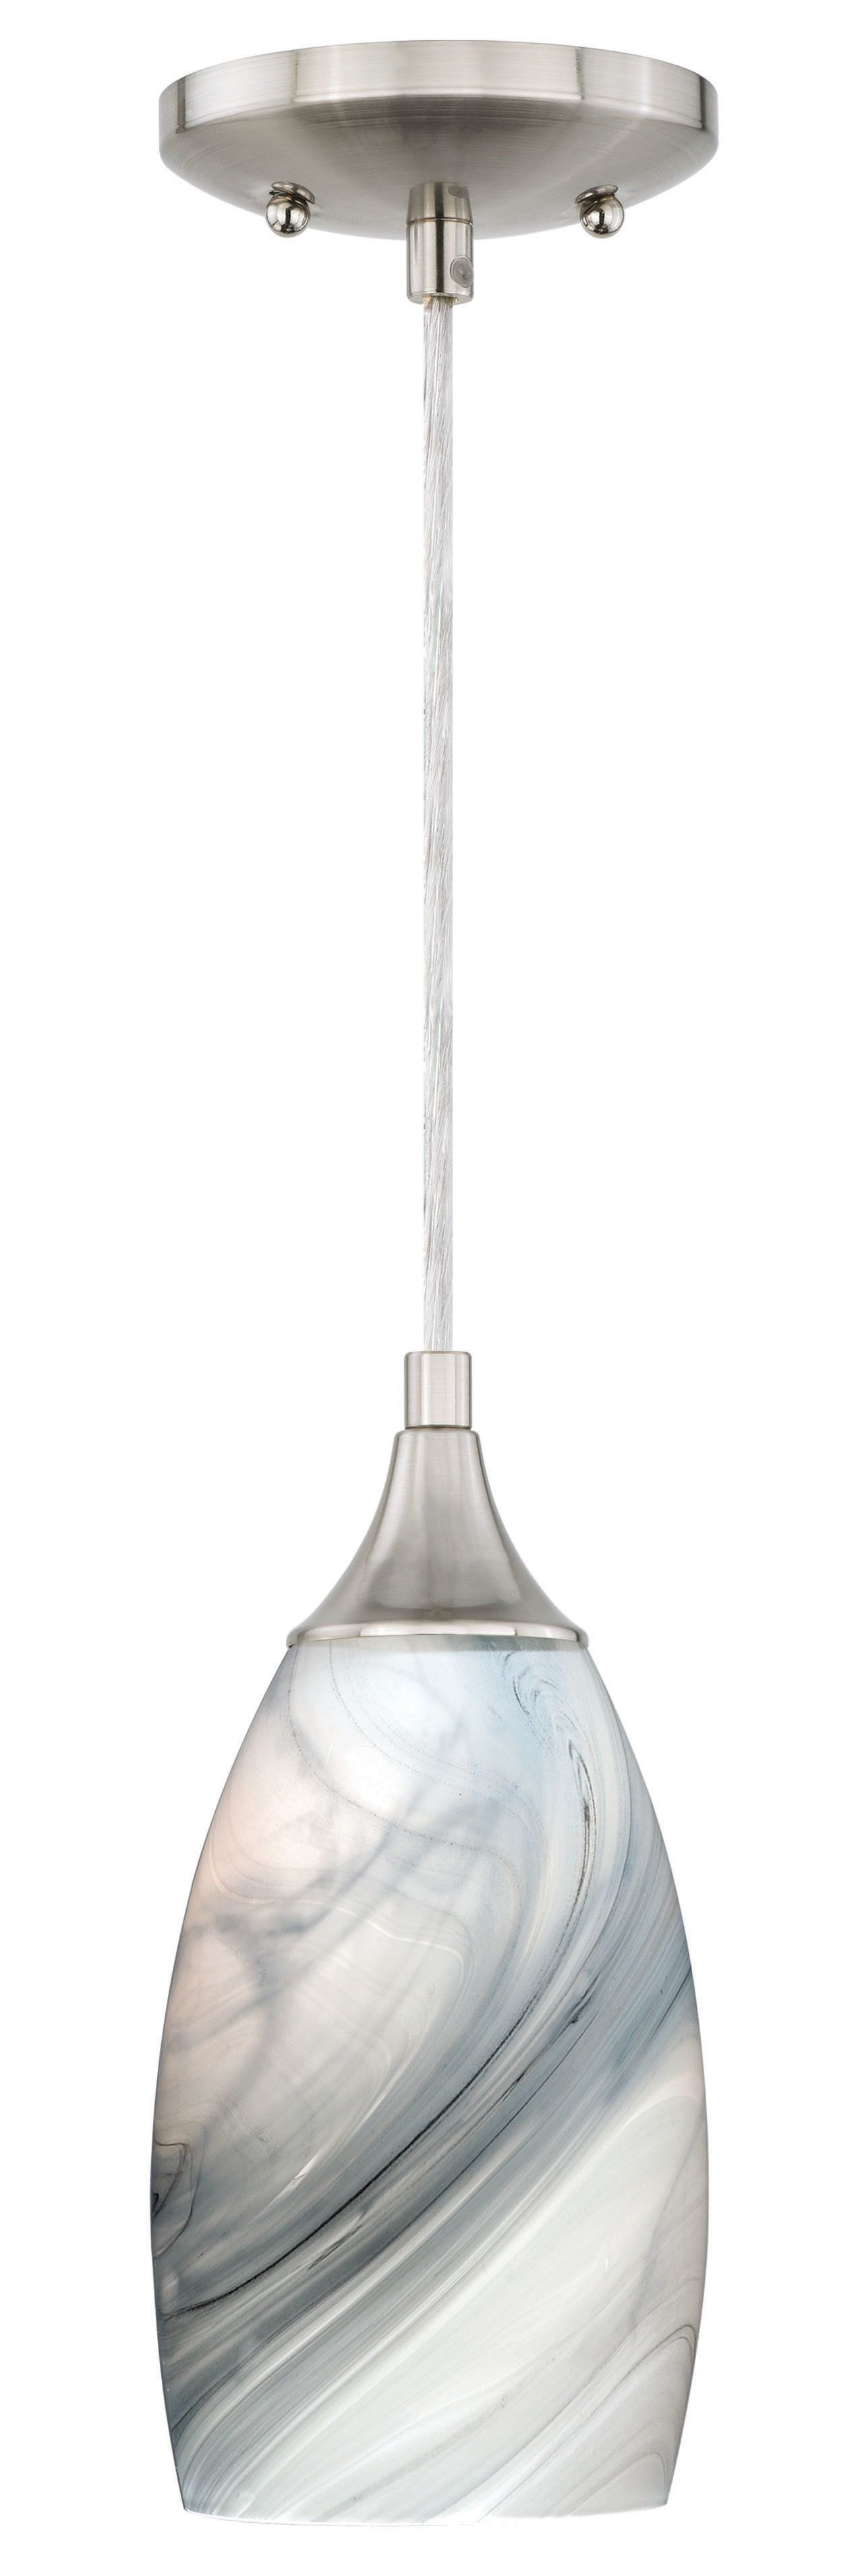 Pewter & Silver & Satin Nickel Pendant Lighting You'll Love With Regard To Most Recently Released Guro 1 Light Cone Pendants (View 7 of 20)